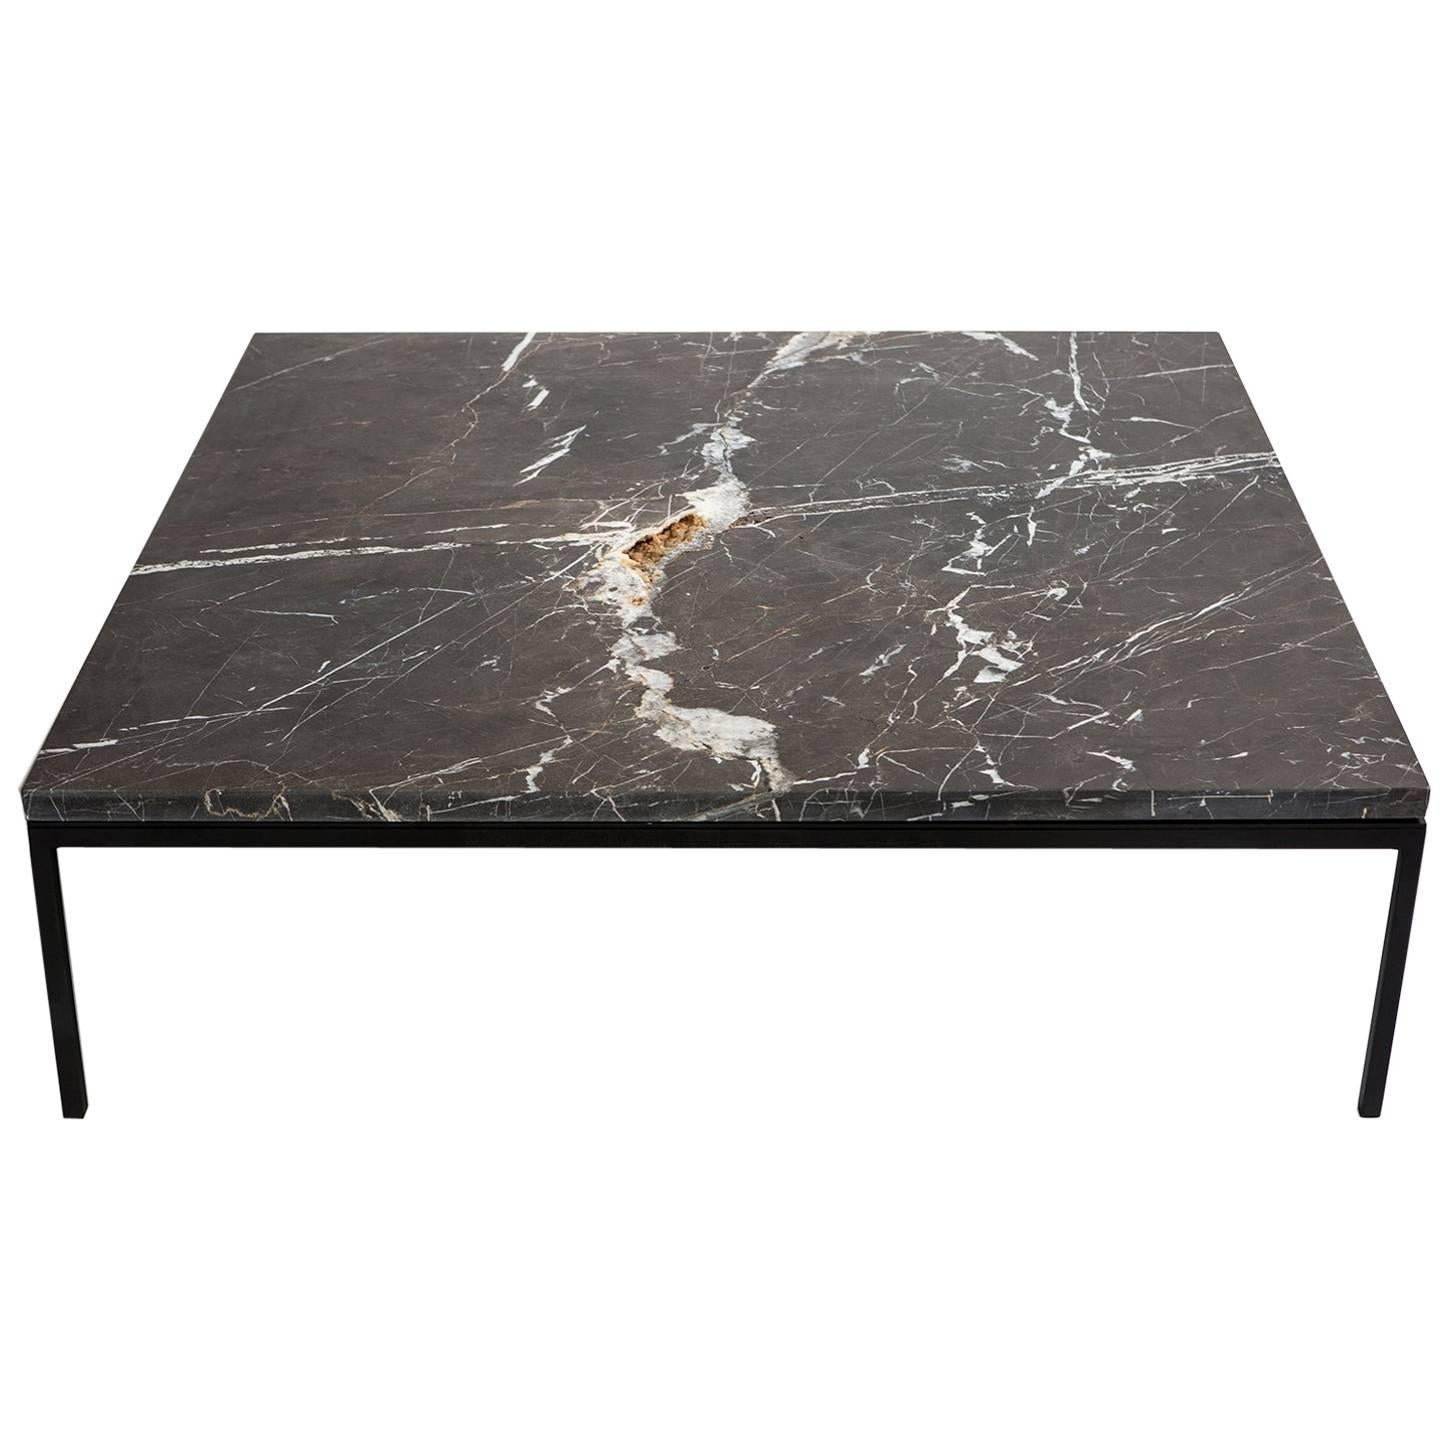 Found Square Coffee Table in Black Marble and Black Steel